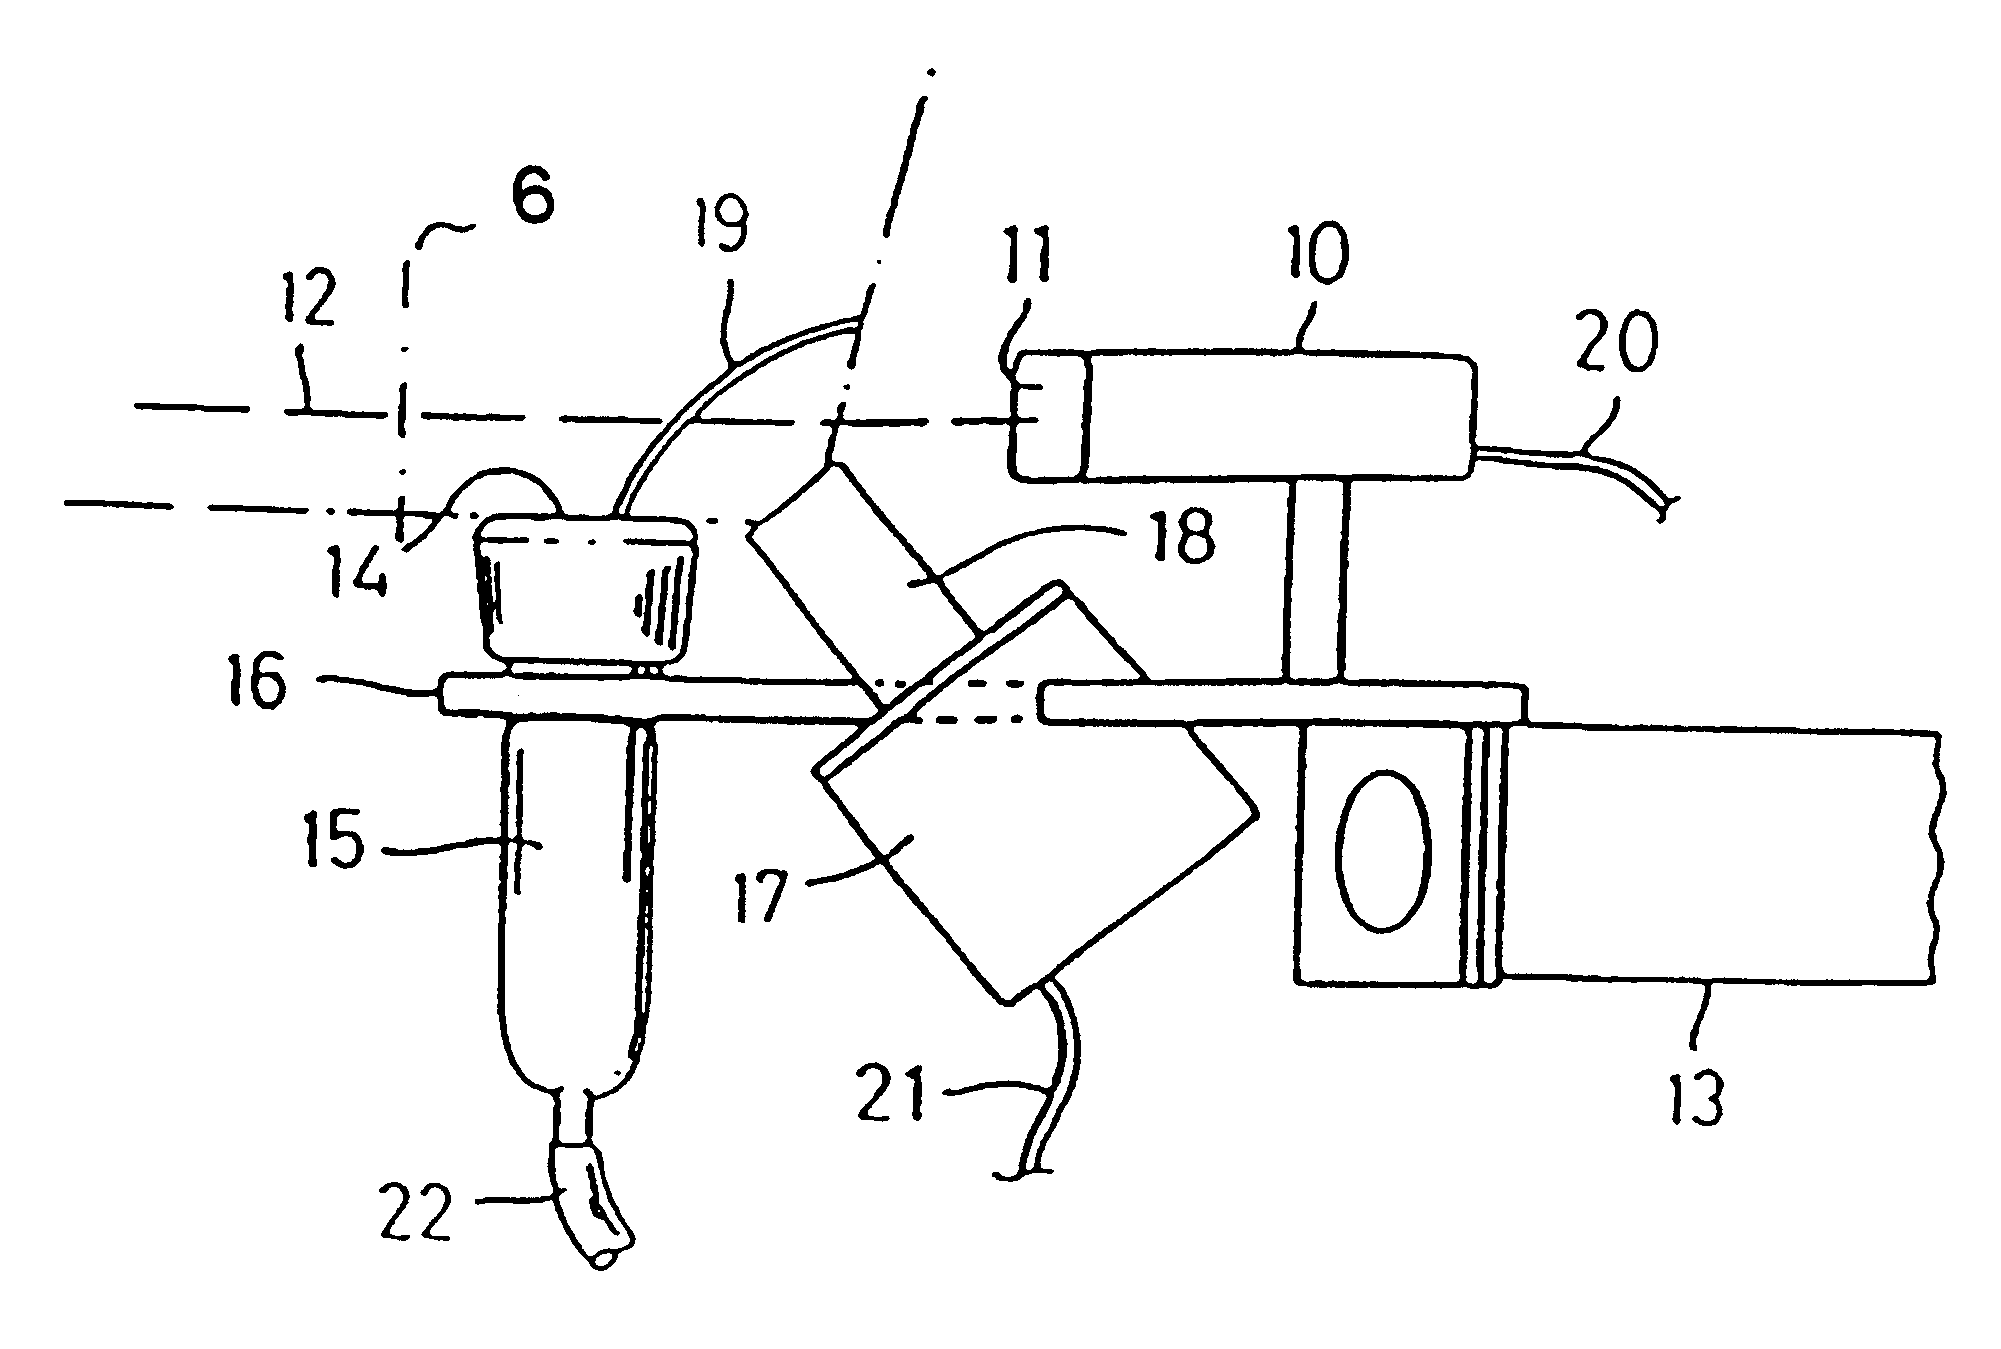 Apparatus and method for recognizing and determining the position of a part of an animal